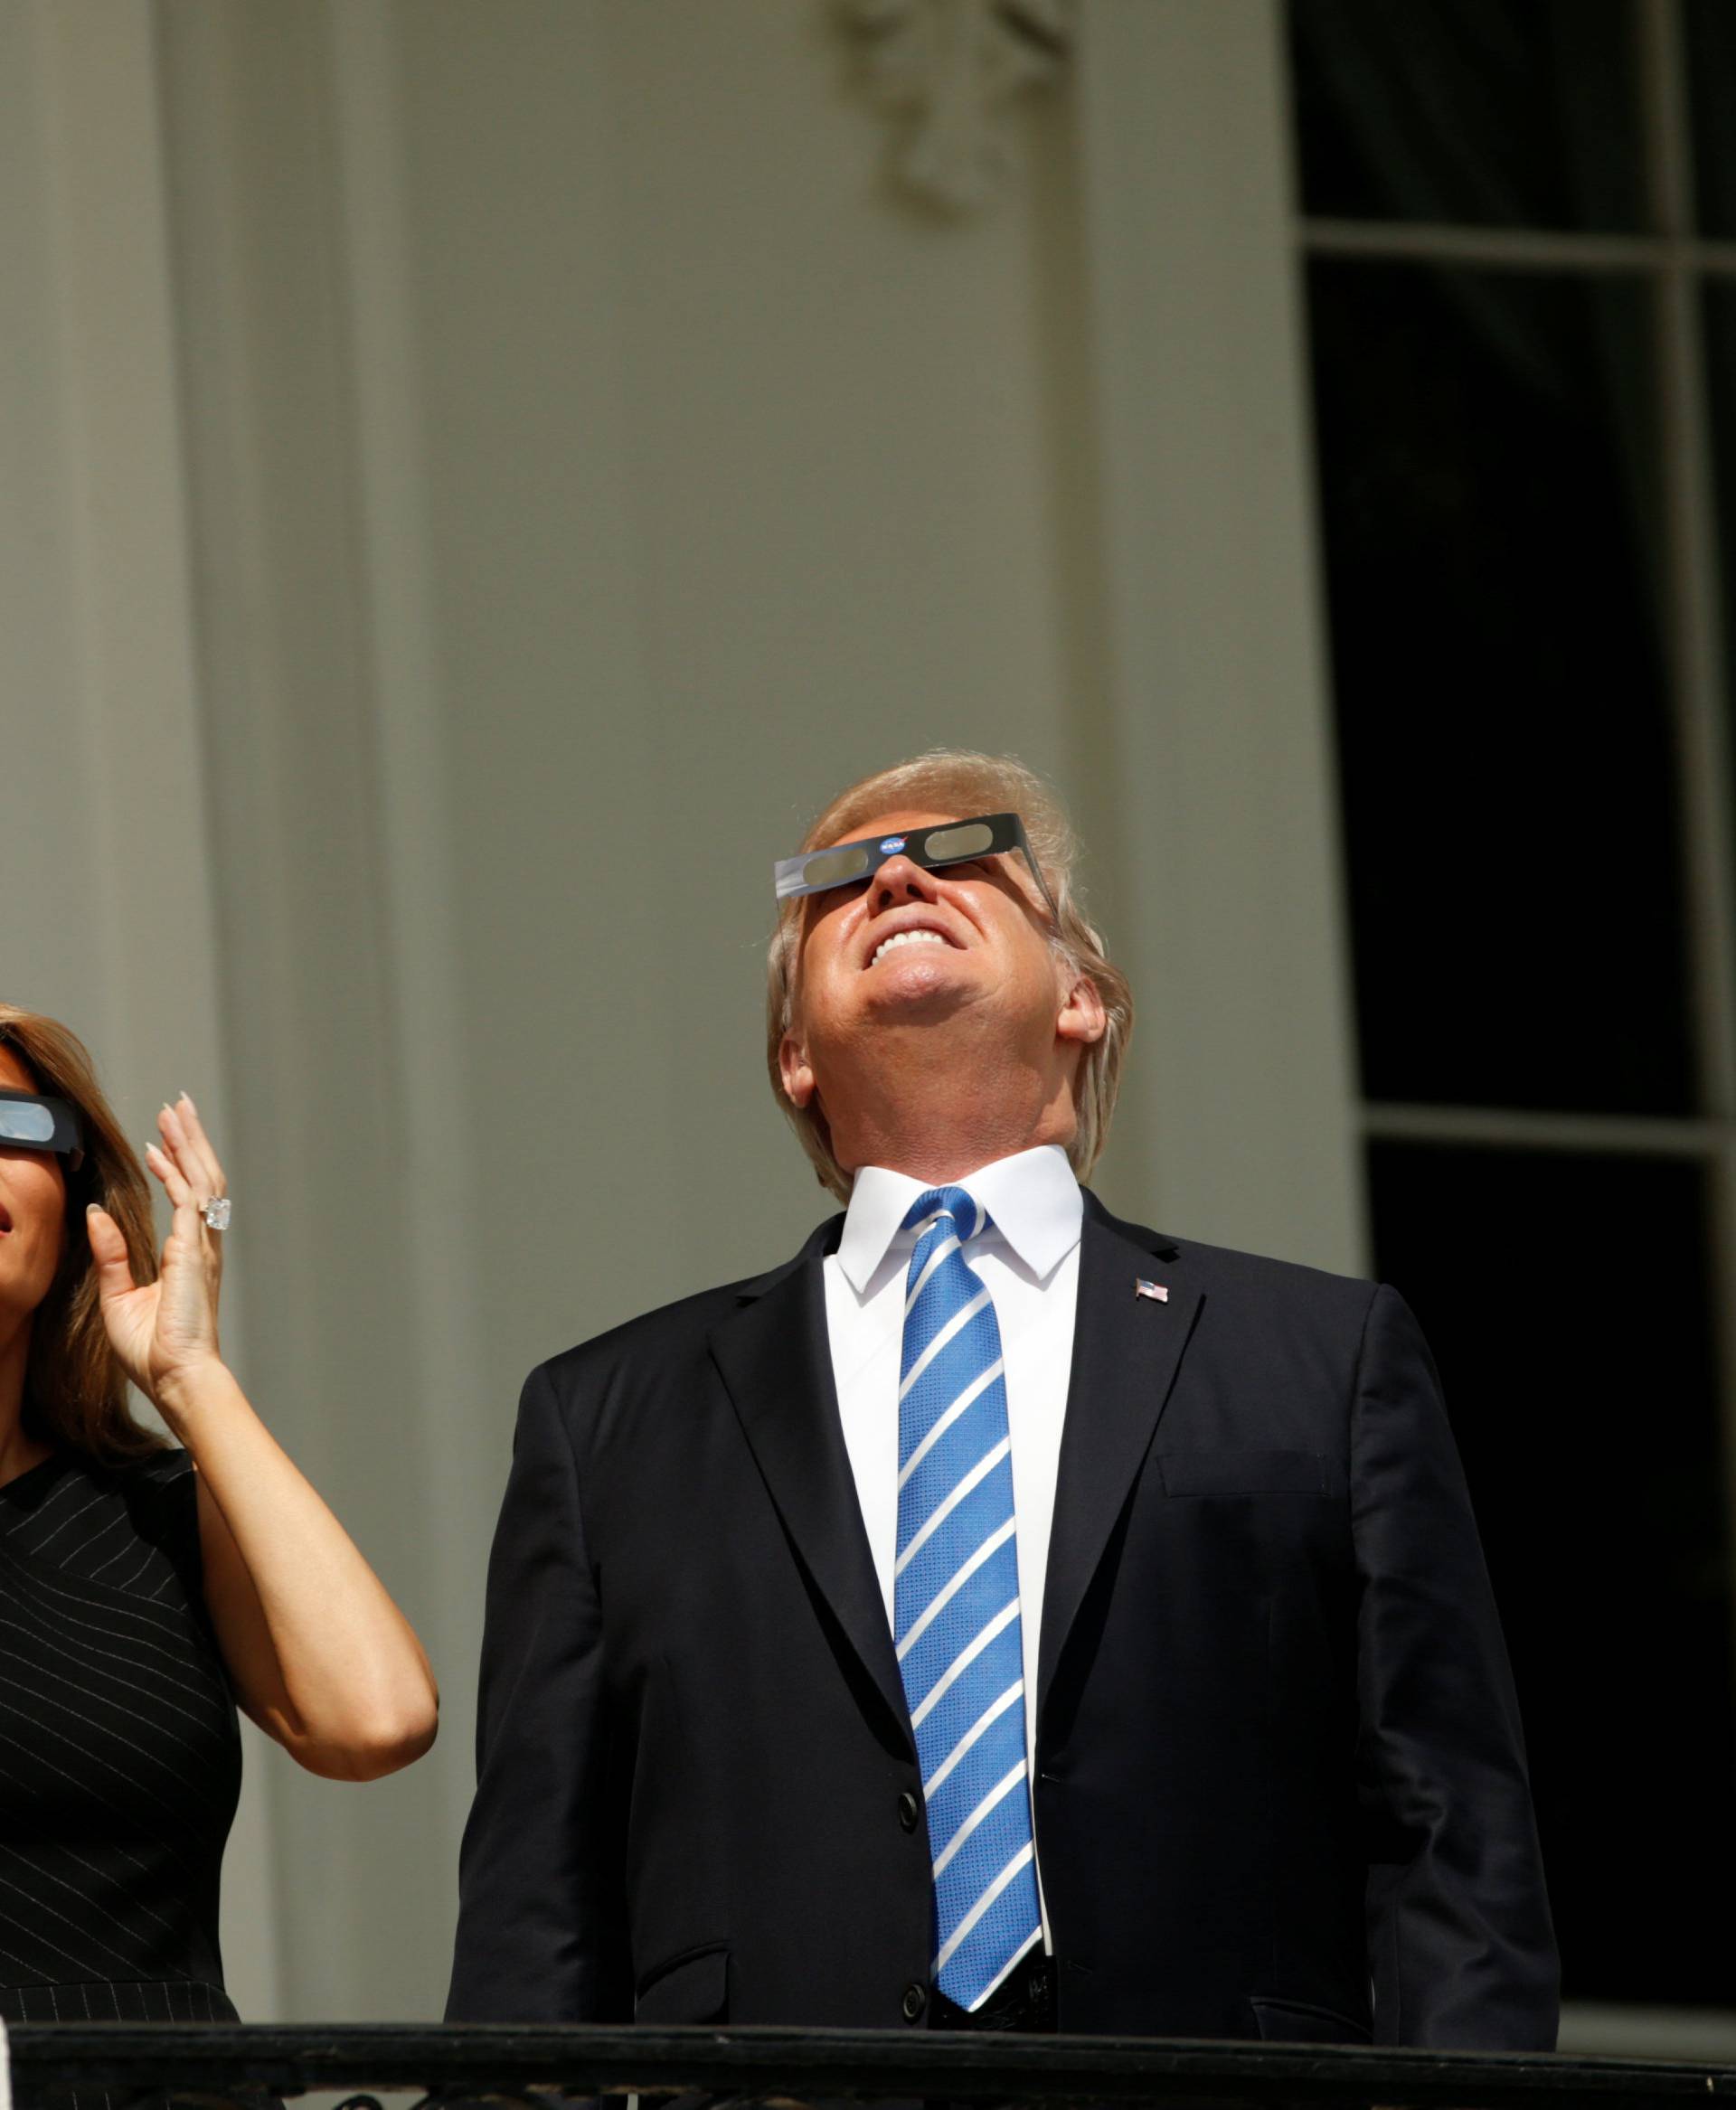 U.S. President Trump watches the solar eclipse with first Lady Melania Trump from the Truman Balcony at the White House in Washington